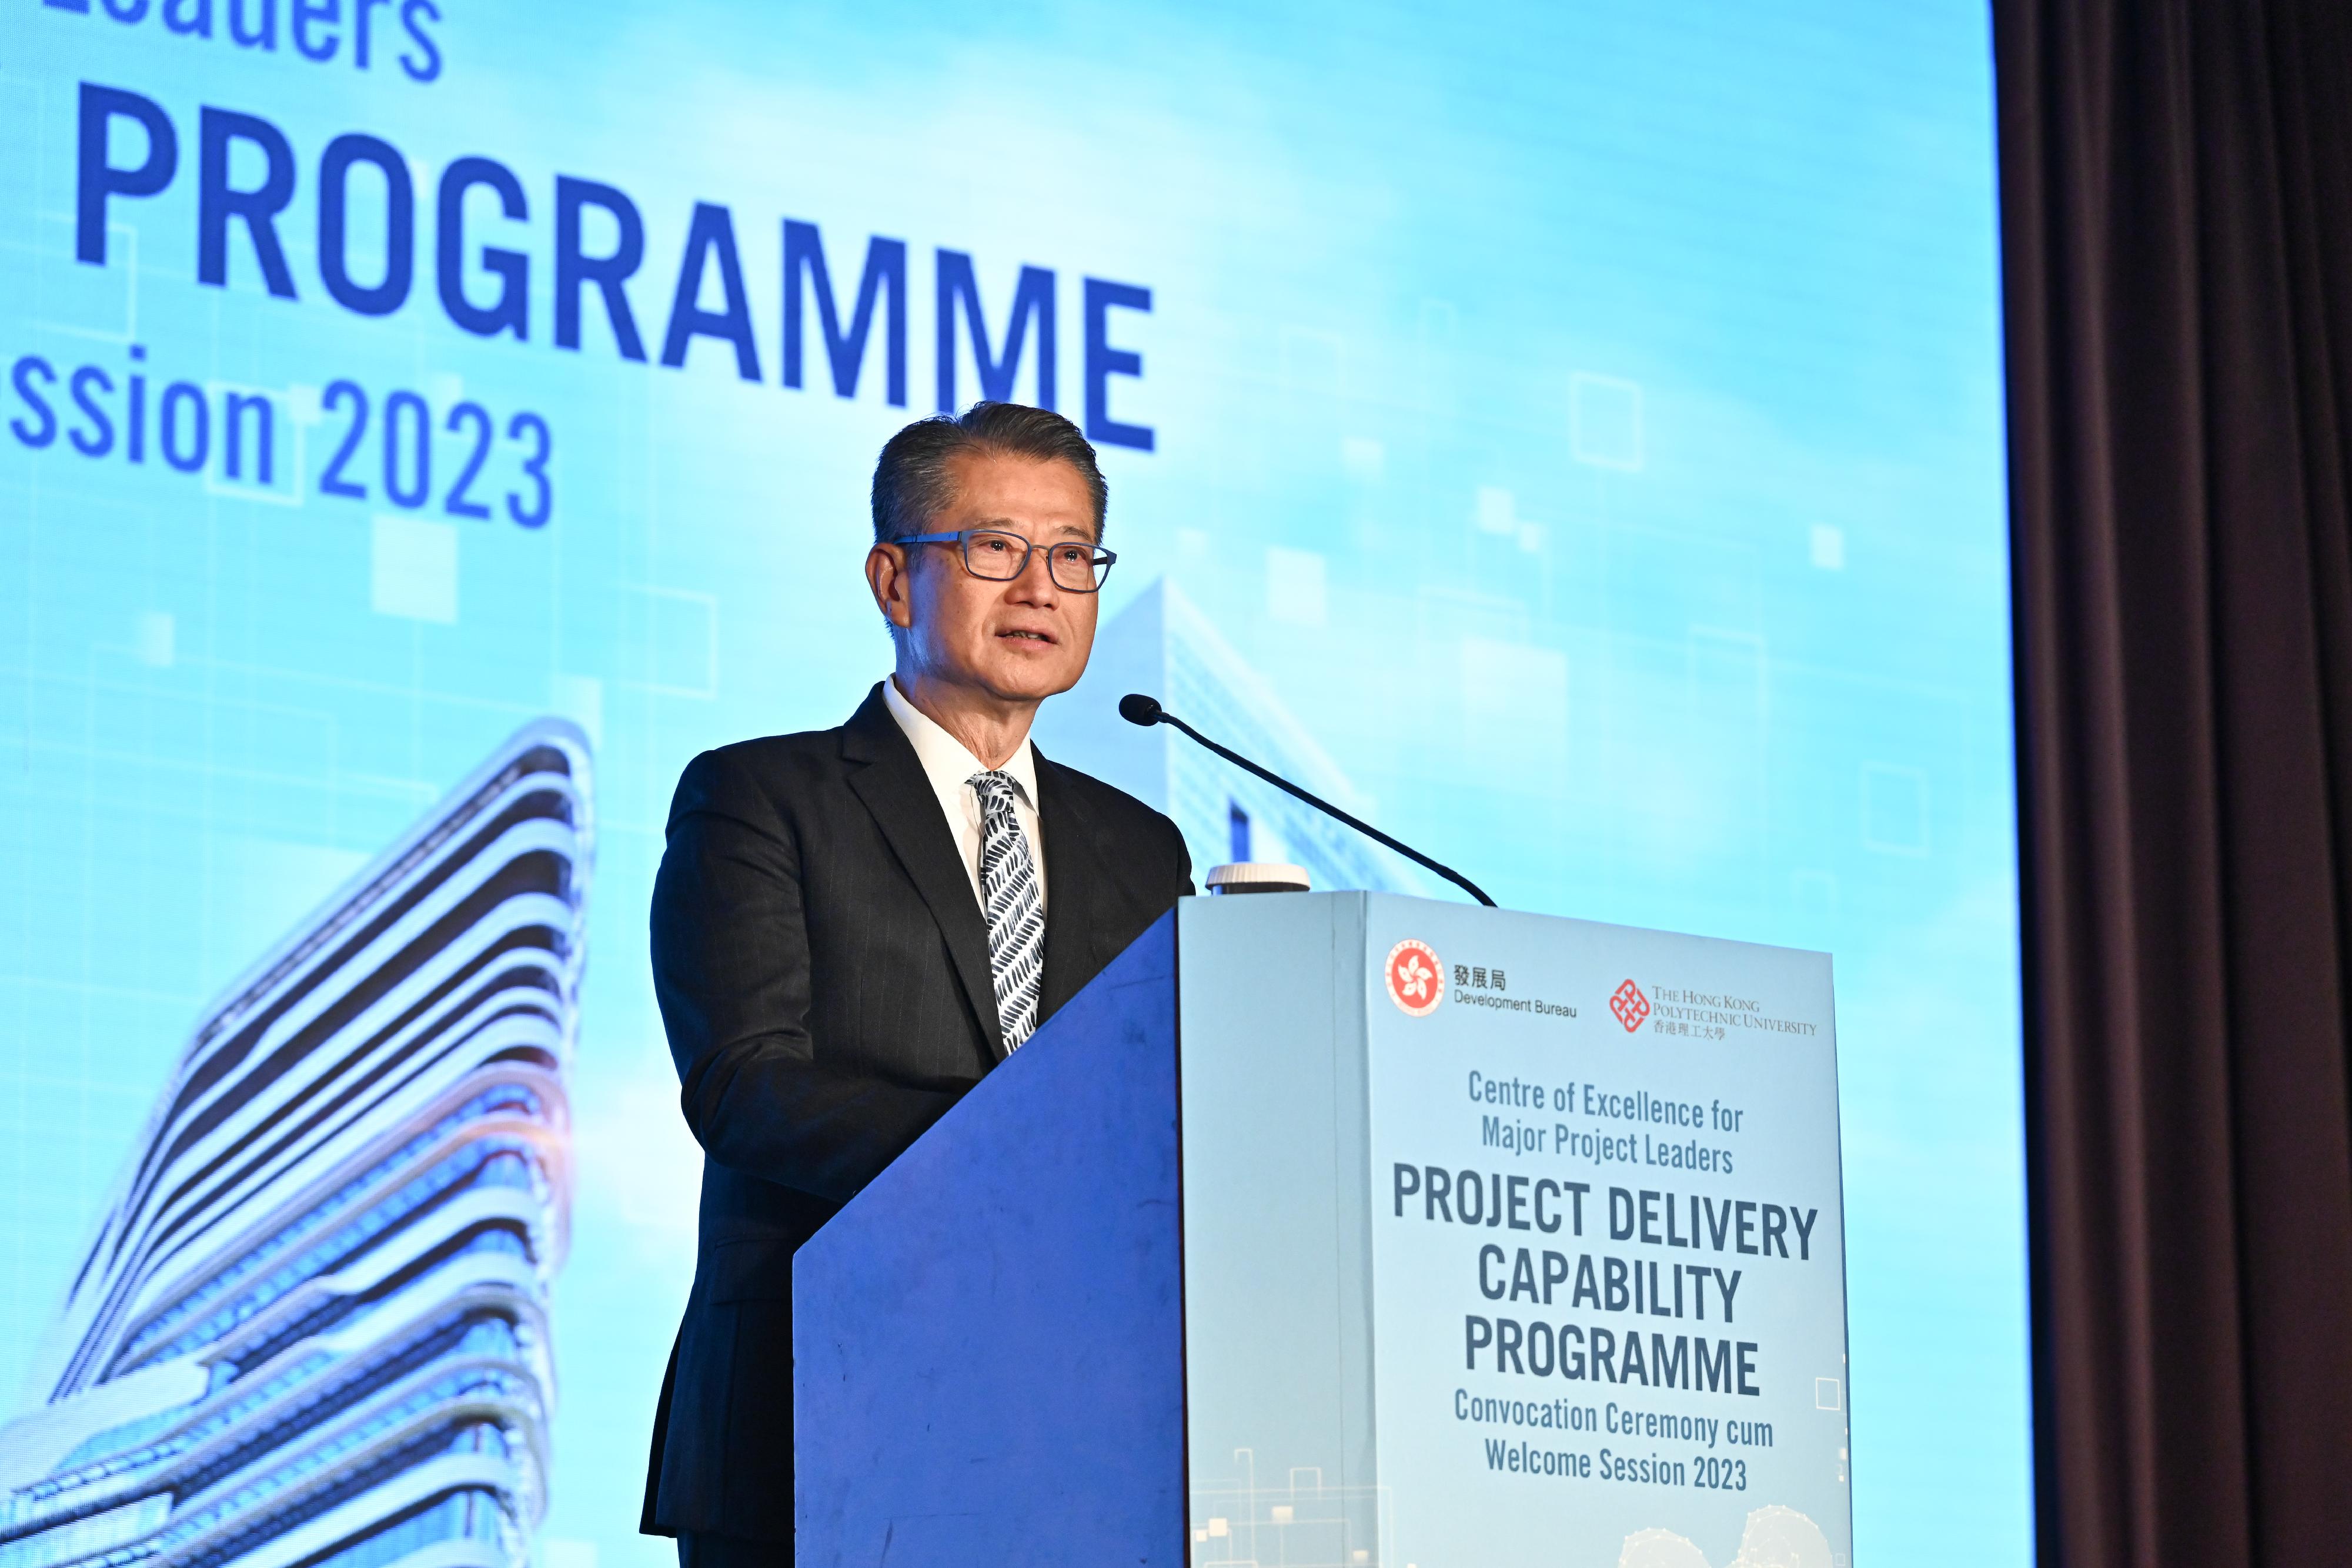 The Centre of Excellence for Major Project Leaders (CoE) under the Development Bureau held the Convocation Ceremony cum Welcome Session 2023 of its Project Delivery Capability Programme today (March 6). Photo shows the Financial Secretary and Honorary President of the CoE, Mr Paul Chan, speaking at the ceremony.